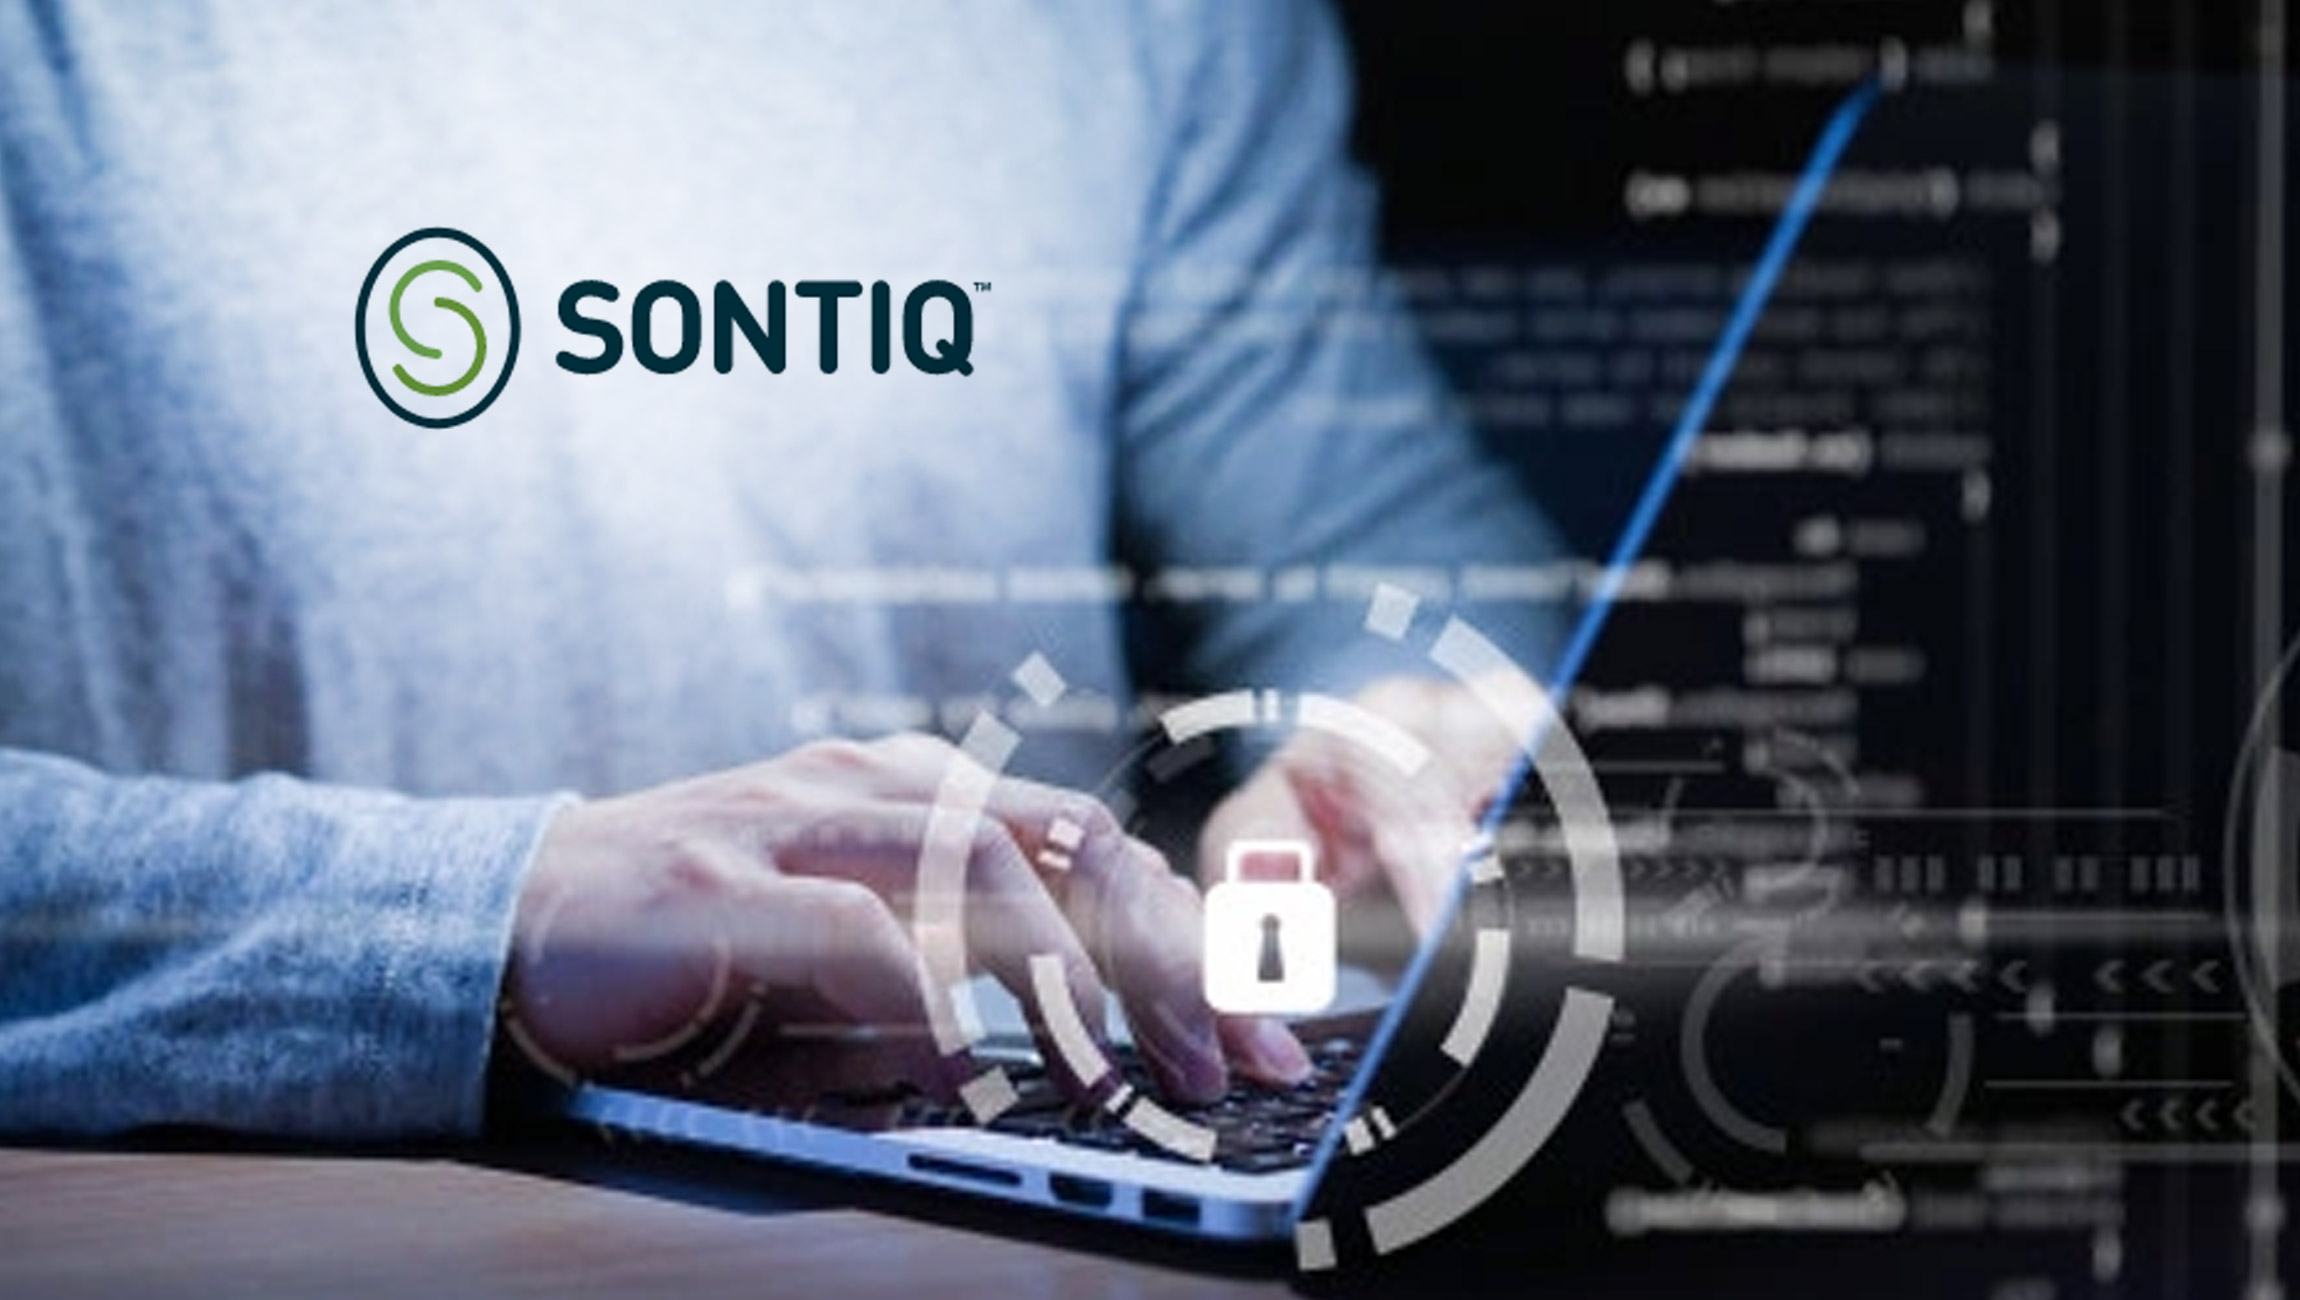 Sontiq’s®-2021-Mid-Year-Cybercrime-Report-Highlights-Key-Fraud-Trends_-Significant-Data-Breaches